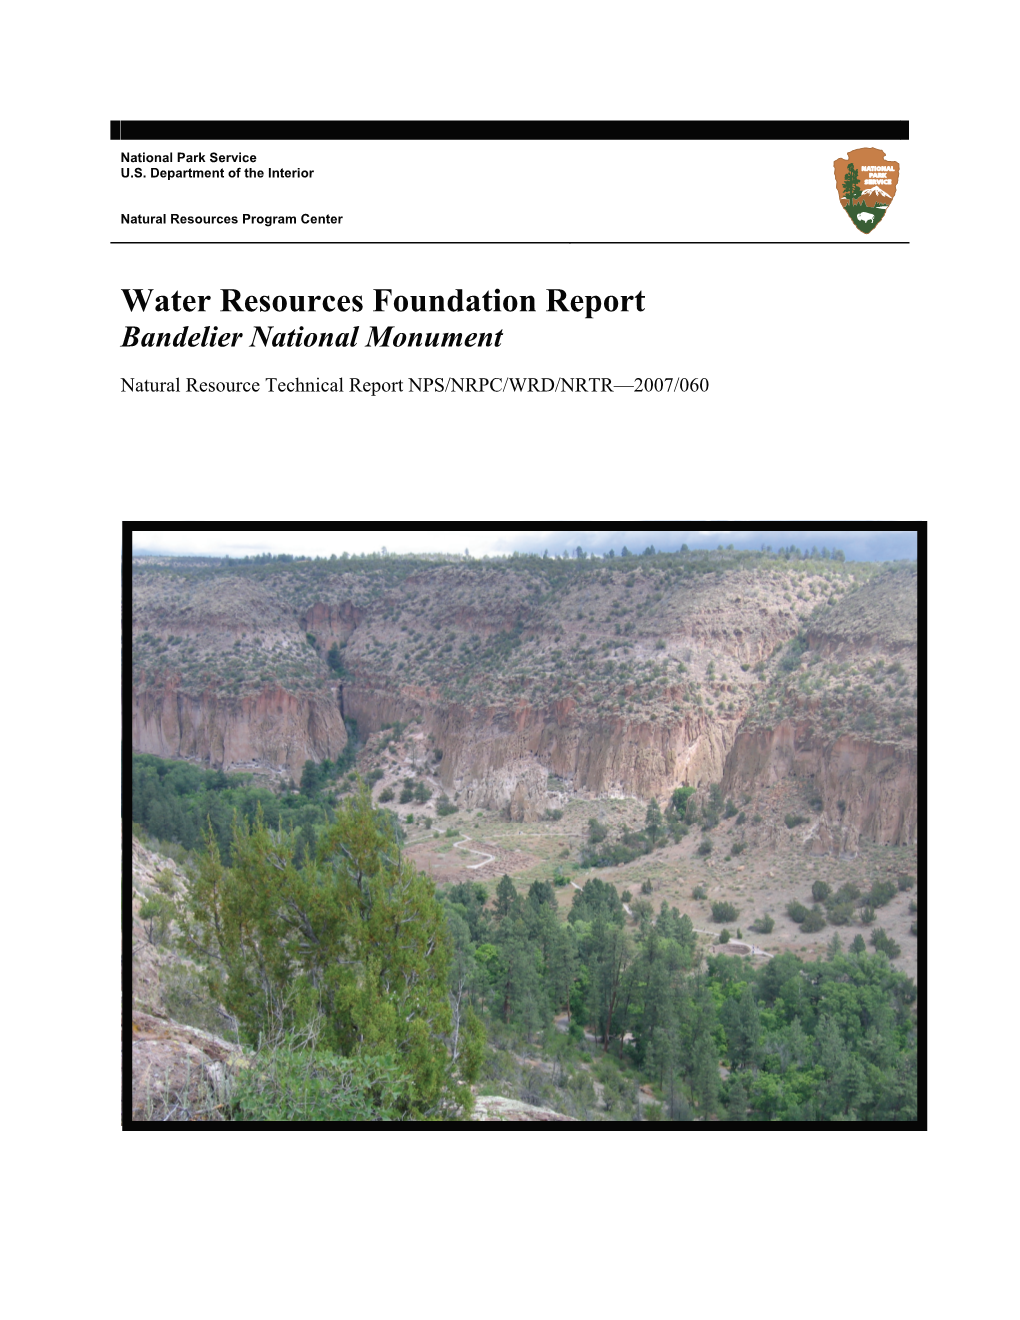 Water Resources Foundation Report, Bandelier National Monument